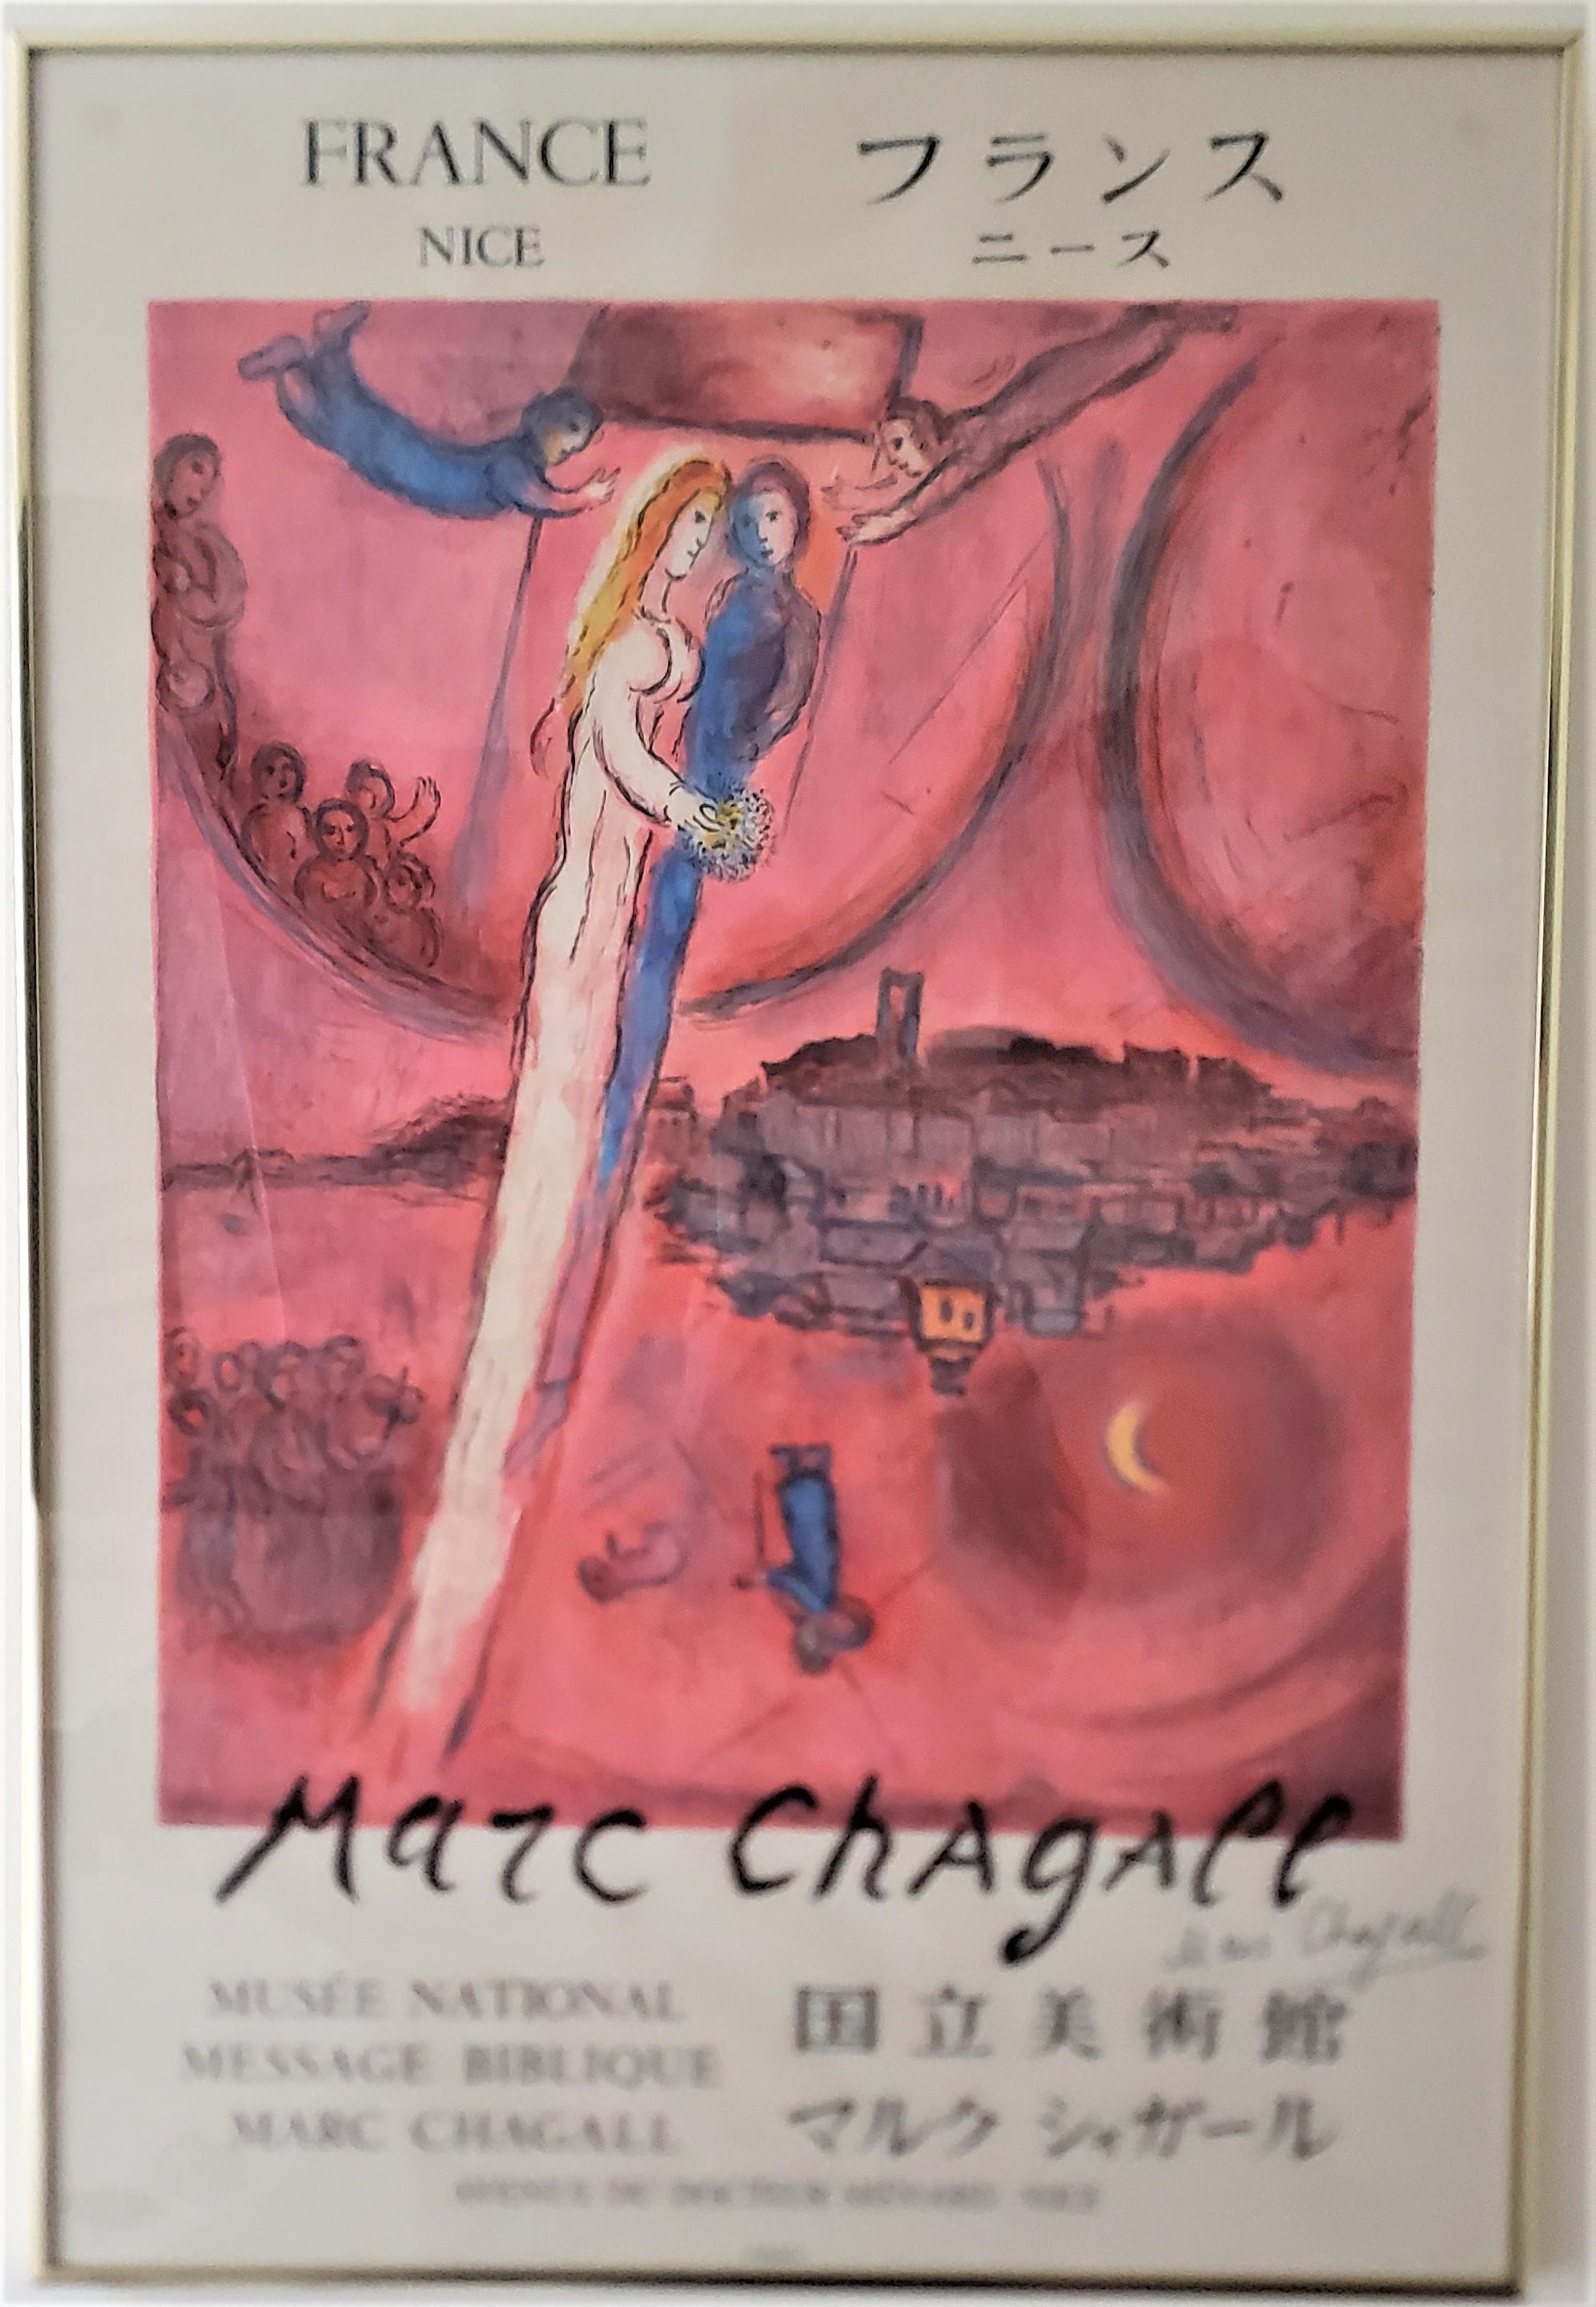 This original poster was printed by Mourlot for the National Museum of Nice France for the Marc Chagall exhibition in approximately 1970 in his Surrealistic style. This lithograph is titled 